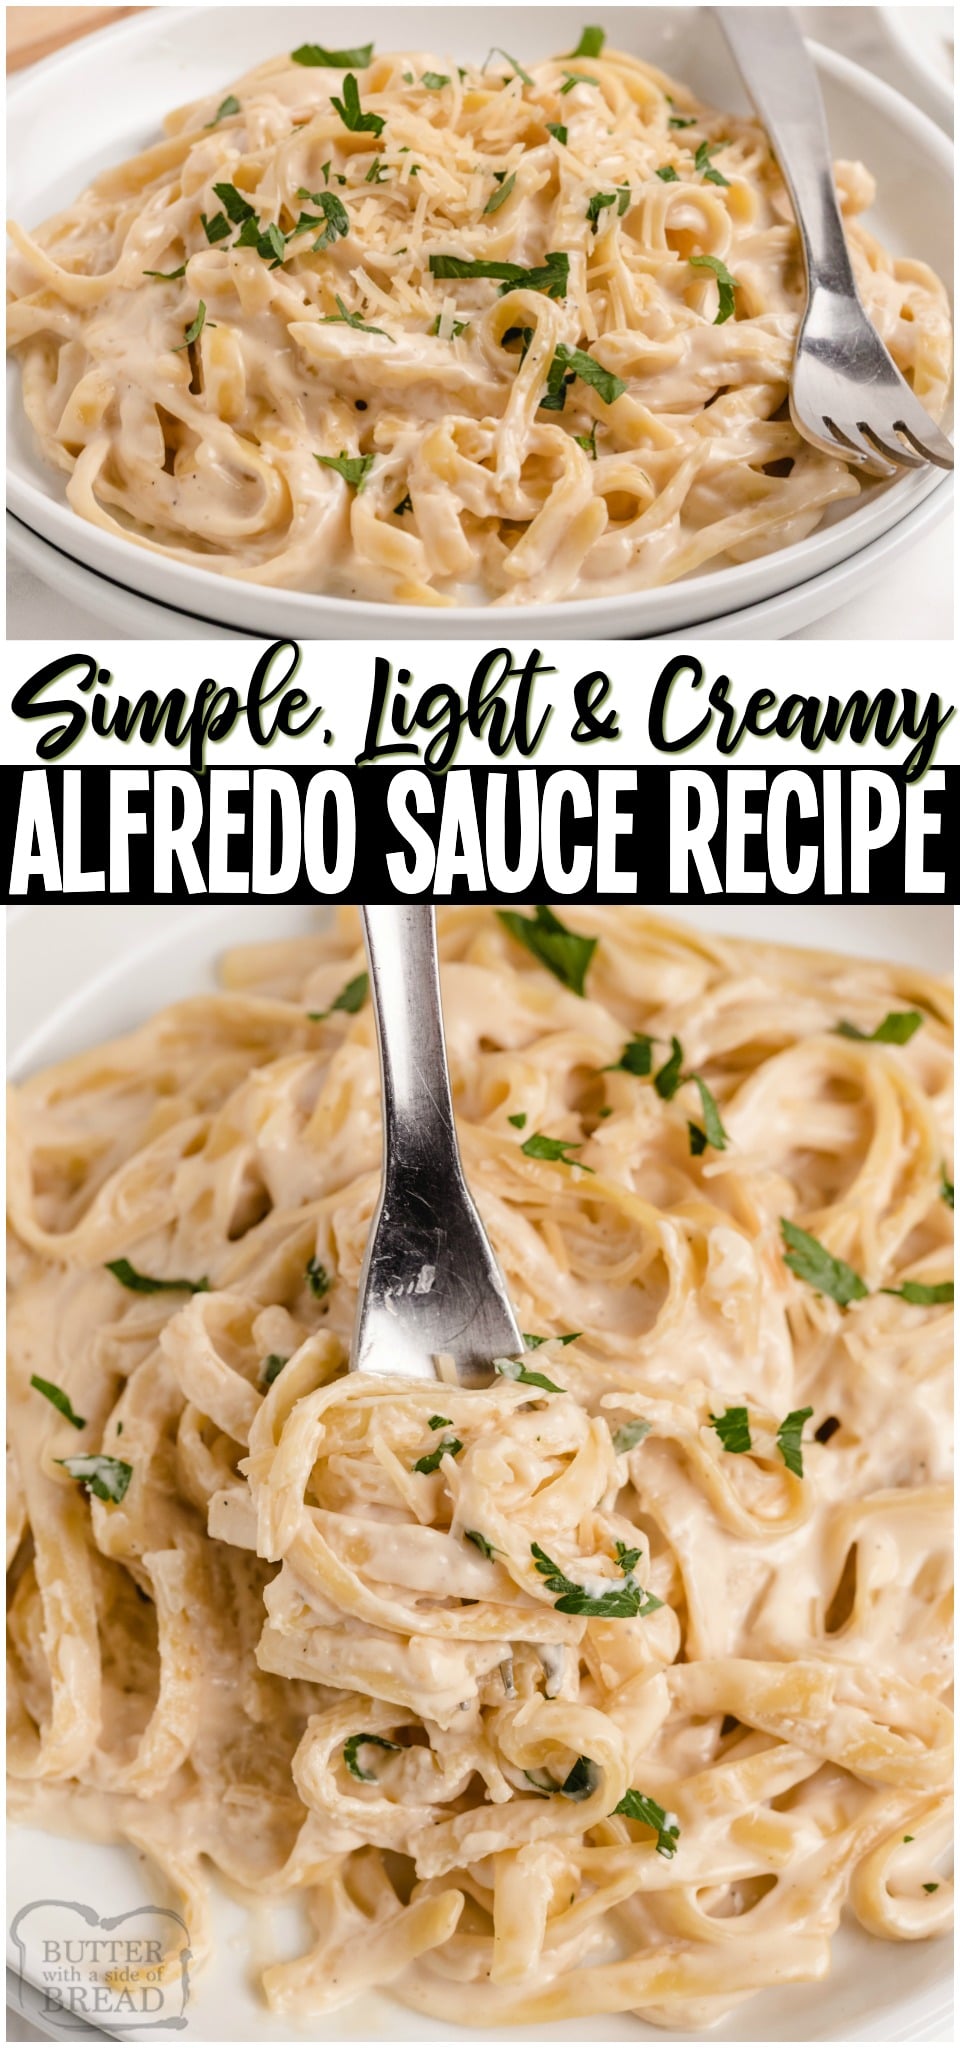 Light Fettuccine Alfredo Pasta is a family favorite dinner featuring our super simple Alfredo sauce recipe! Creamy Alfredo with a fraction of the fat & calories and all the flavor!